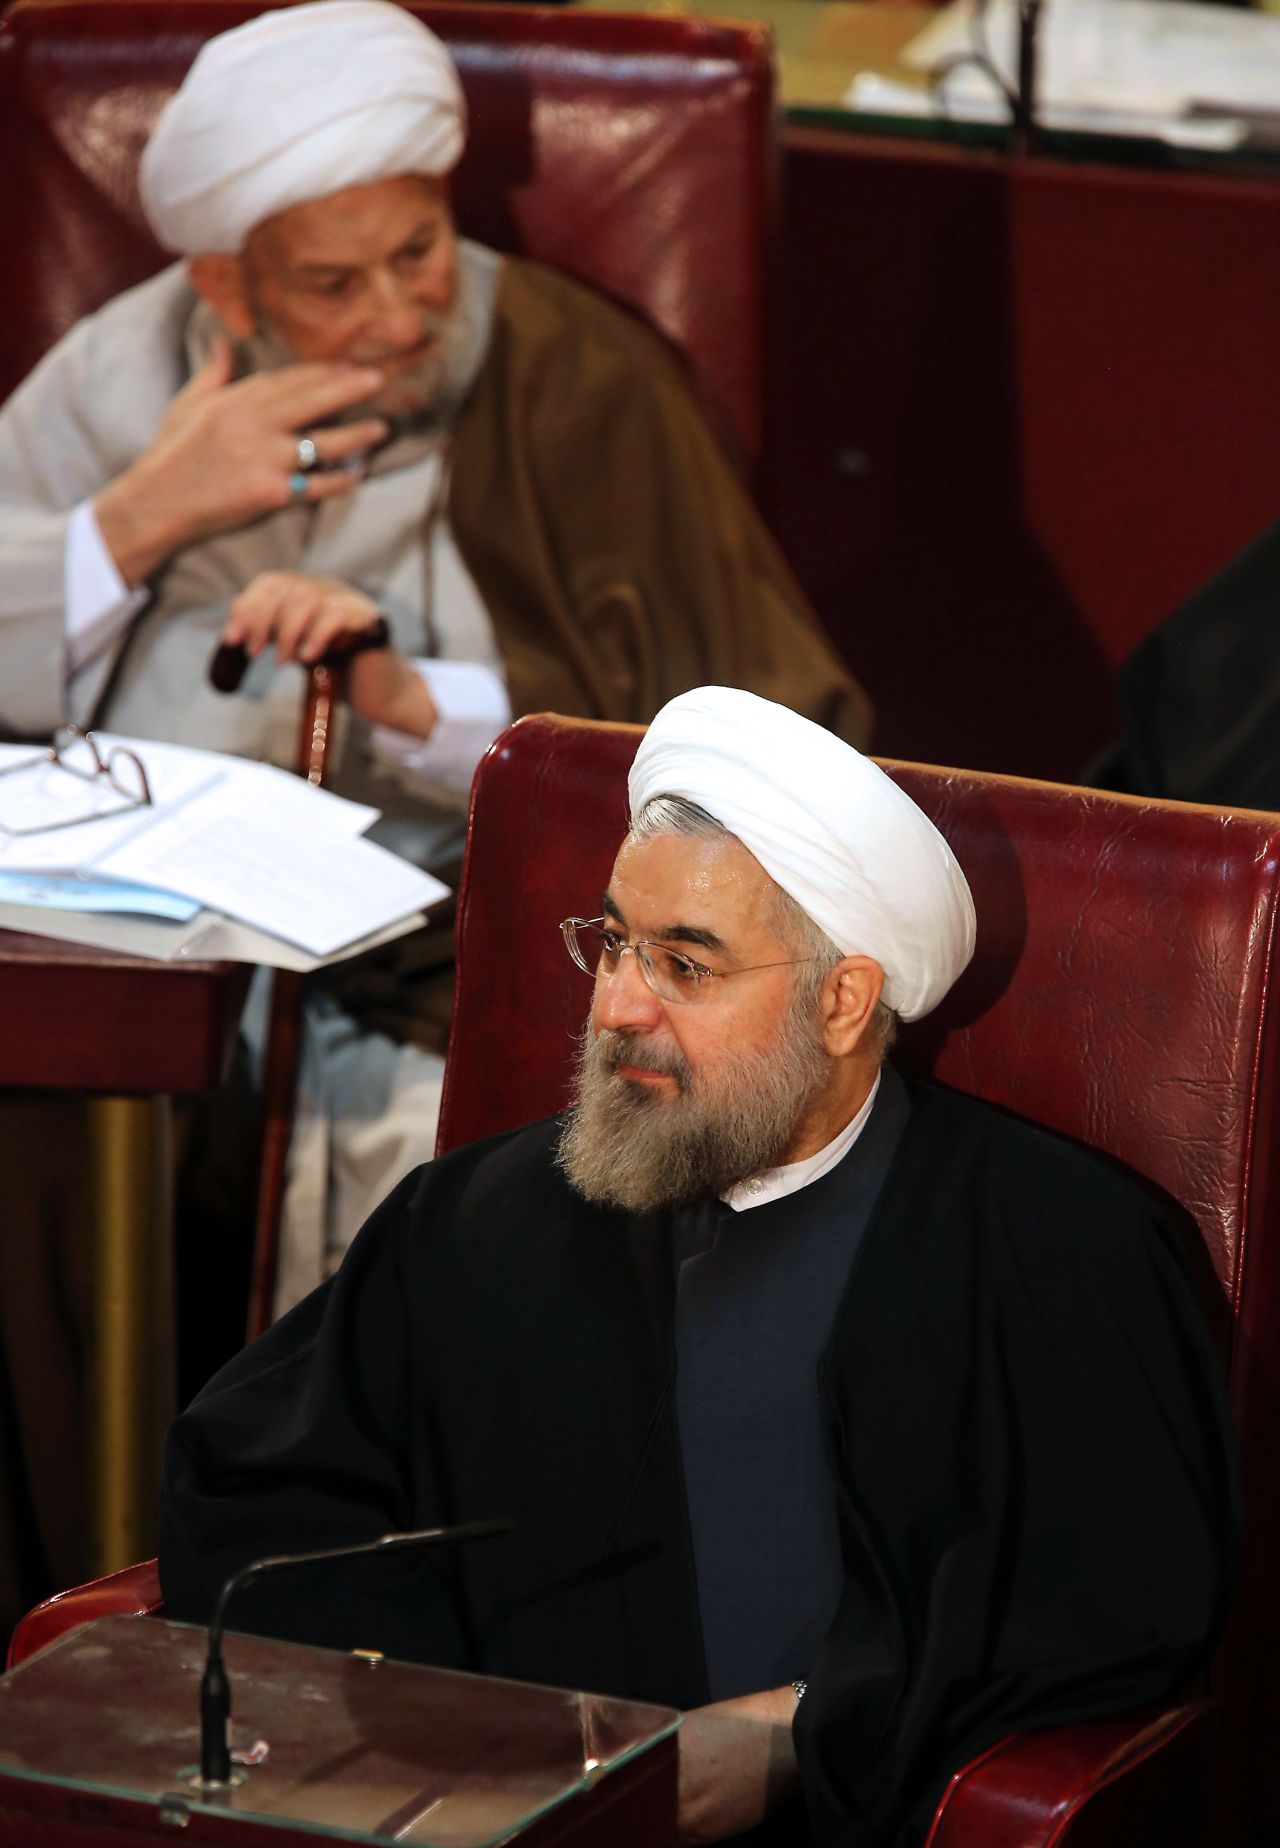 Hassan Rouhani is head of the Center for Strategic Studies and Iran's chief nuclear negotiator under former President Mohammad Khatami.